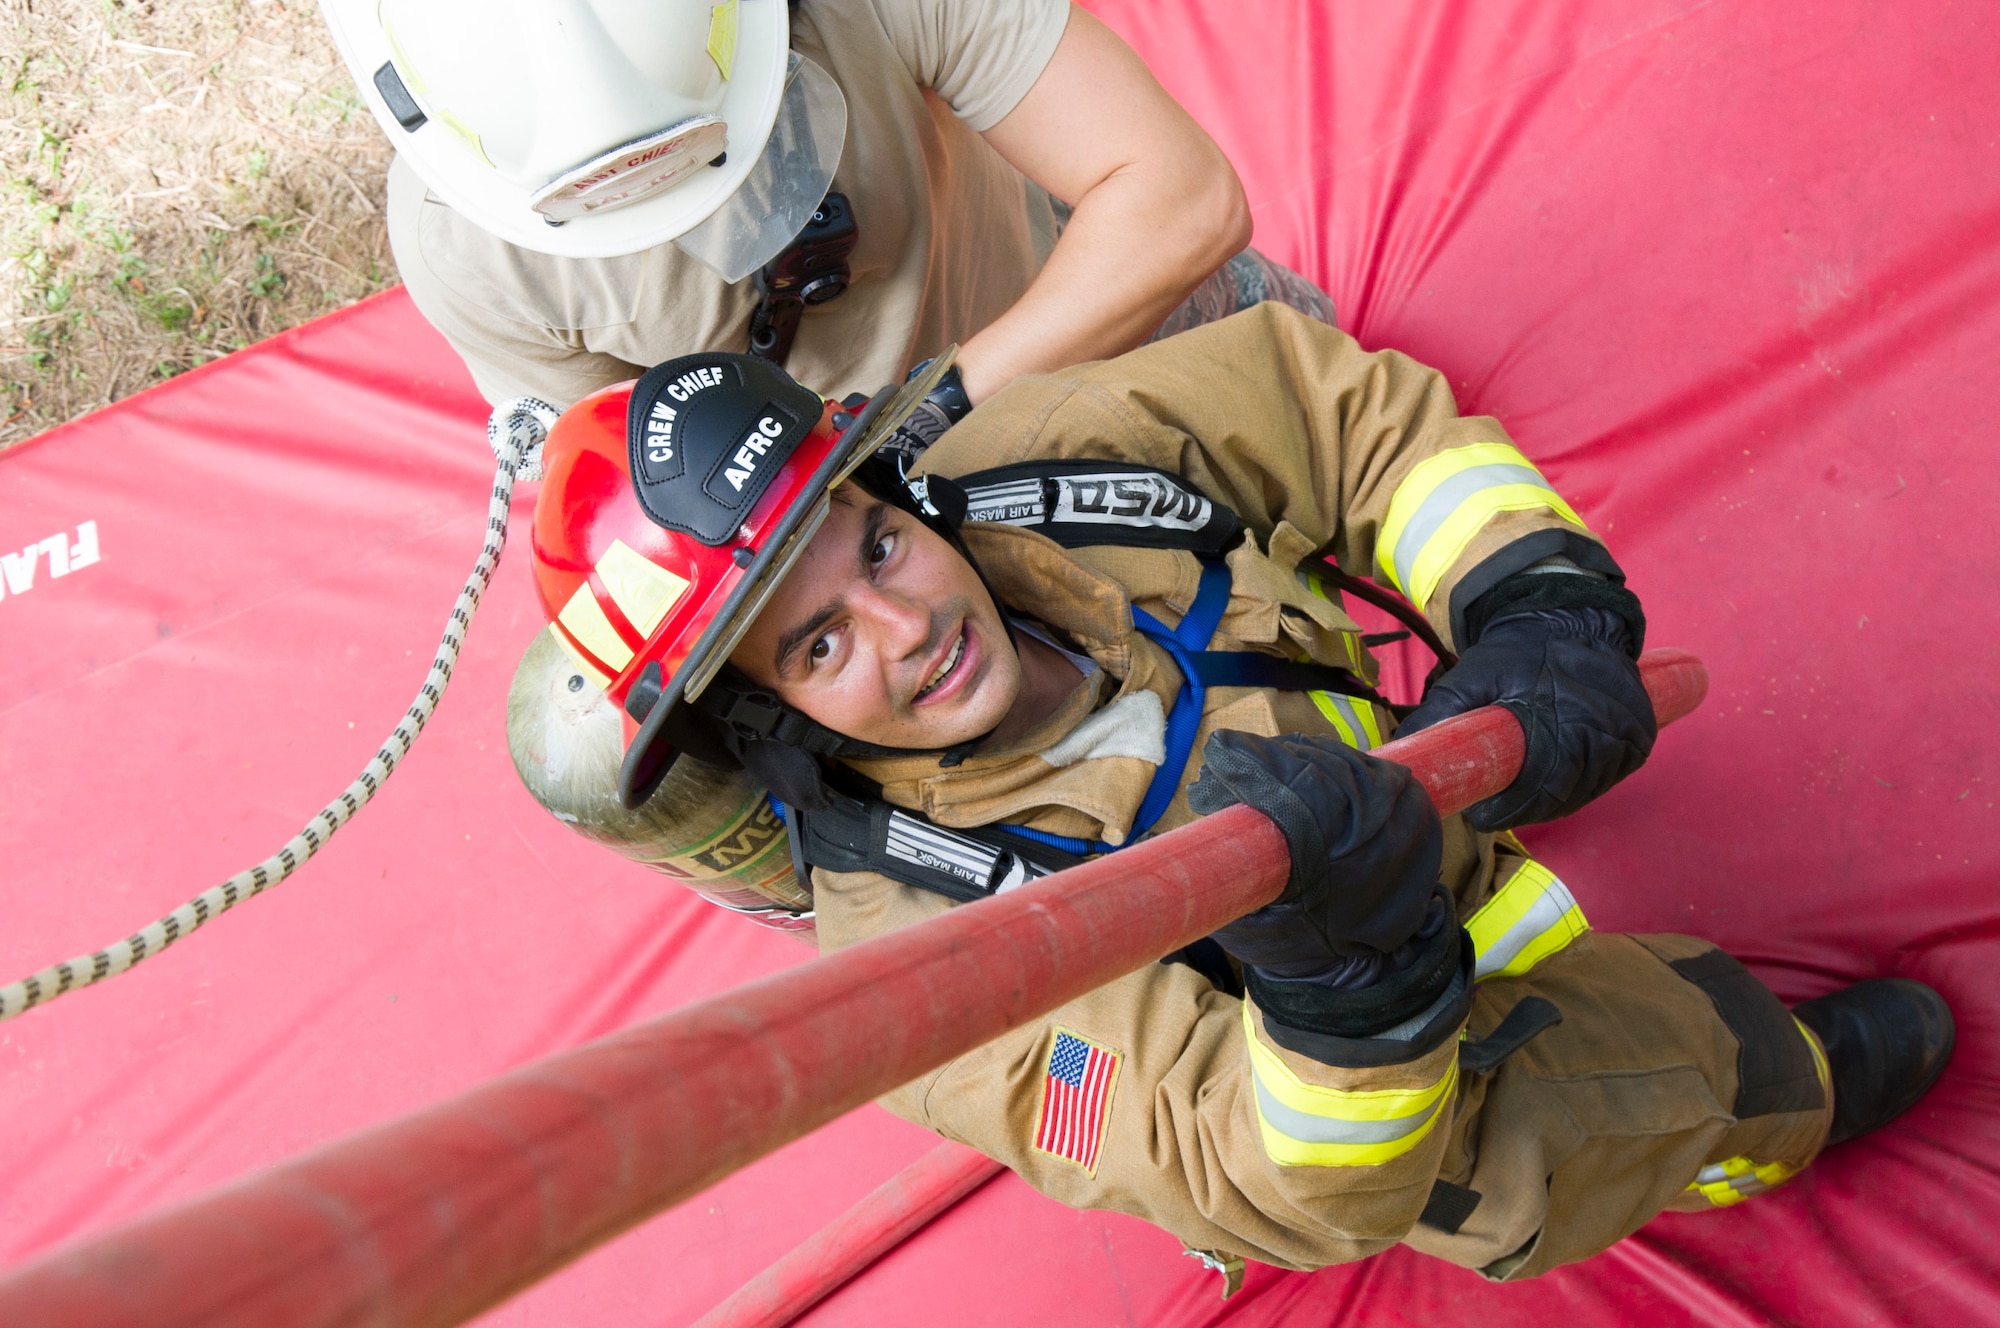 U.S. Air Force Tech. Sgt. Matthew Pires, from the island of Maui, and a member of the 624th Civil Engineer Squadron from Joint Base Pearl Harbor-Hickam, Hawaii, finishes his descent following a hoseline bailout during the first-ever Air Force Reserve Command Firefighter Rescue and Survival Course at Dobbins Air Reserve Base, Ga., April 18, 2017. Twenty Citizen Airmen participated in the intense 50-hour course held at the 622nd Civil Engineer Group expeditionary combat support-training certification center, which focused on a Rapid Intervention Crew, or RIC. The RIC is a dedicated and specially trained group of firefighters whose responsibilities include safely evacuating a distressed firefighter from a structure. (U.S. Air Force photo by Master Sgt. Theanne K. Herrmann)